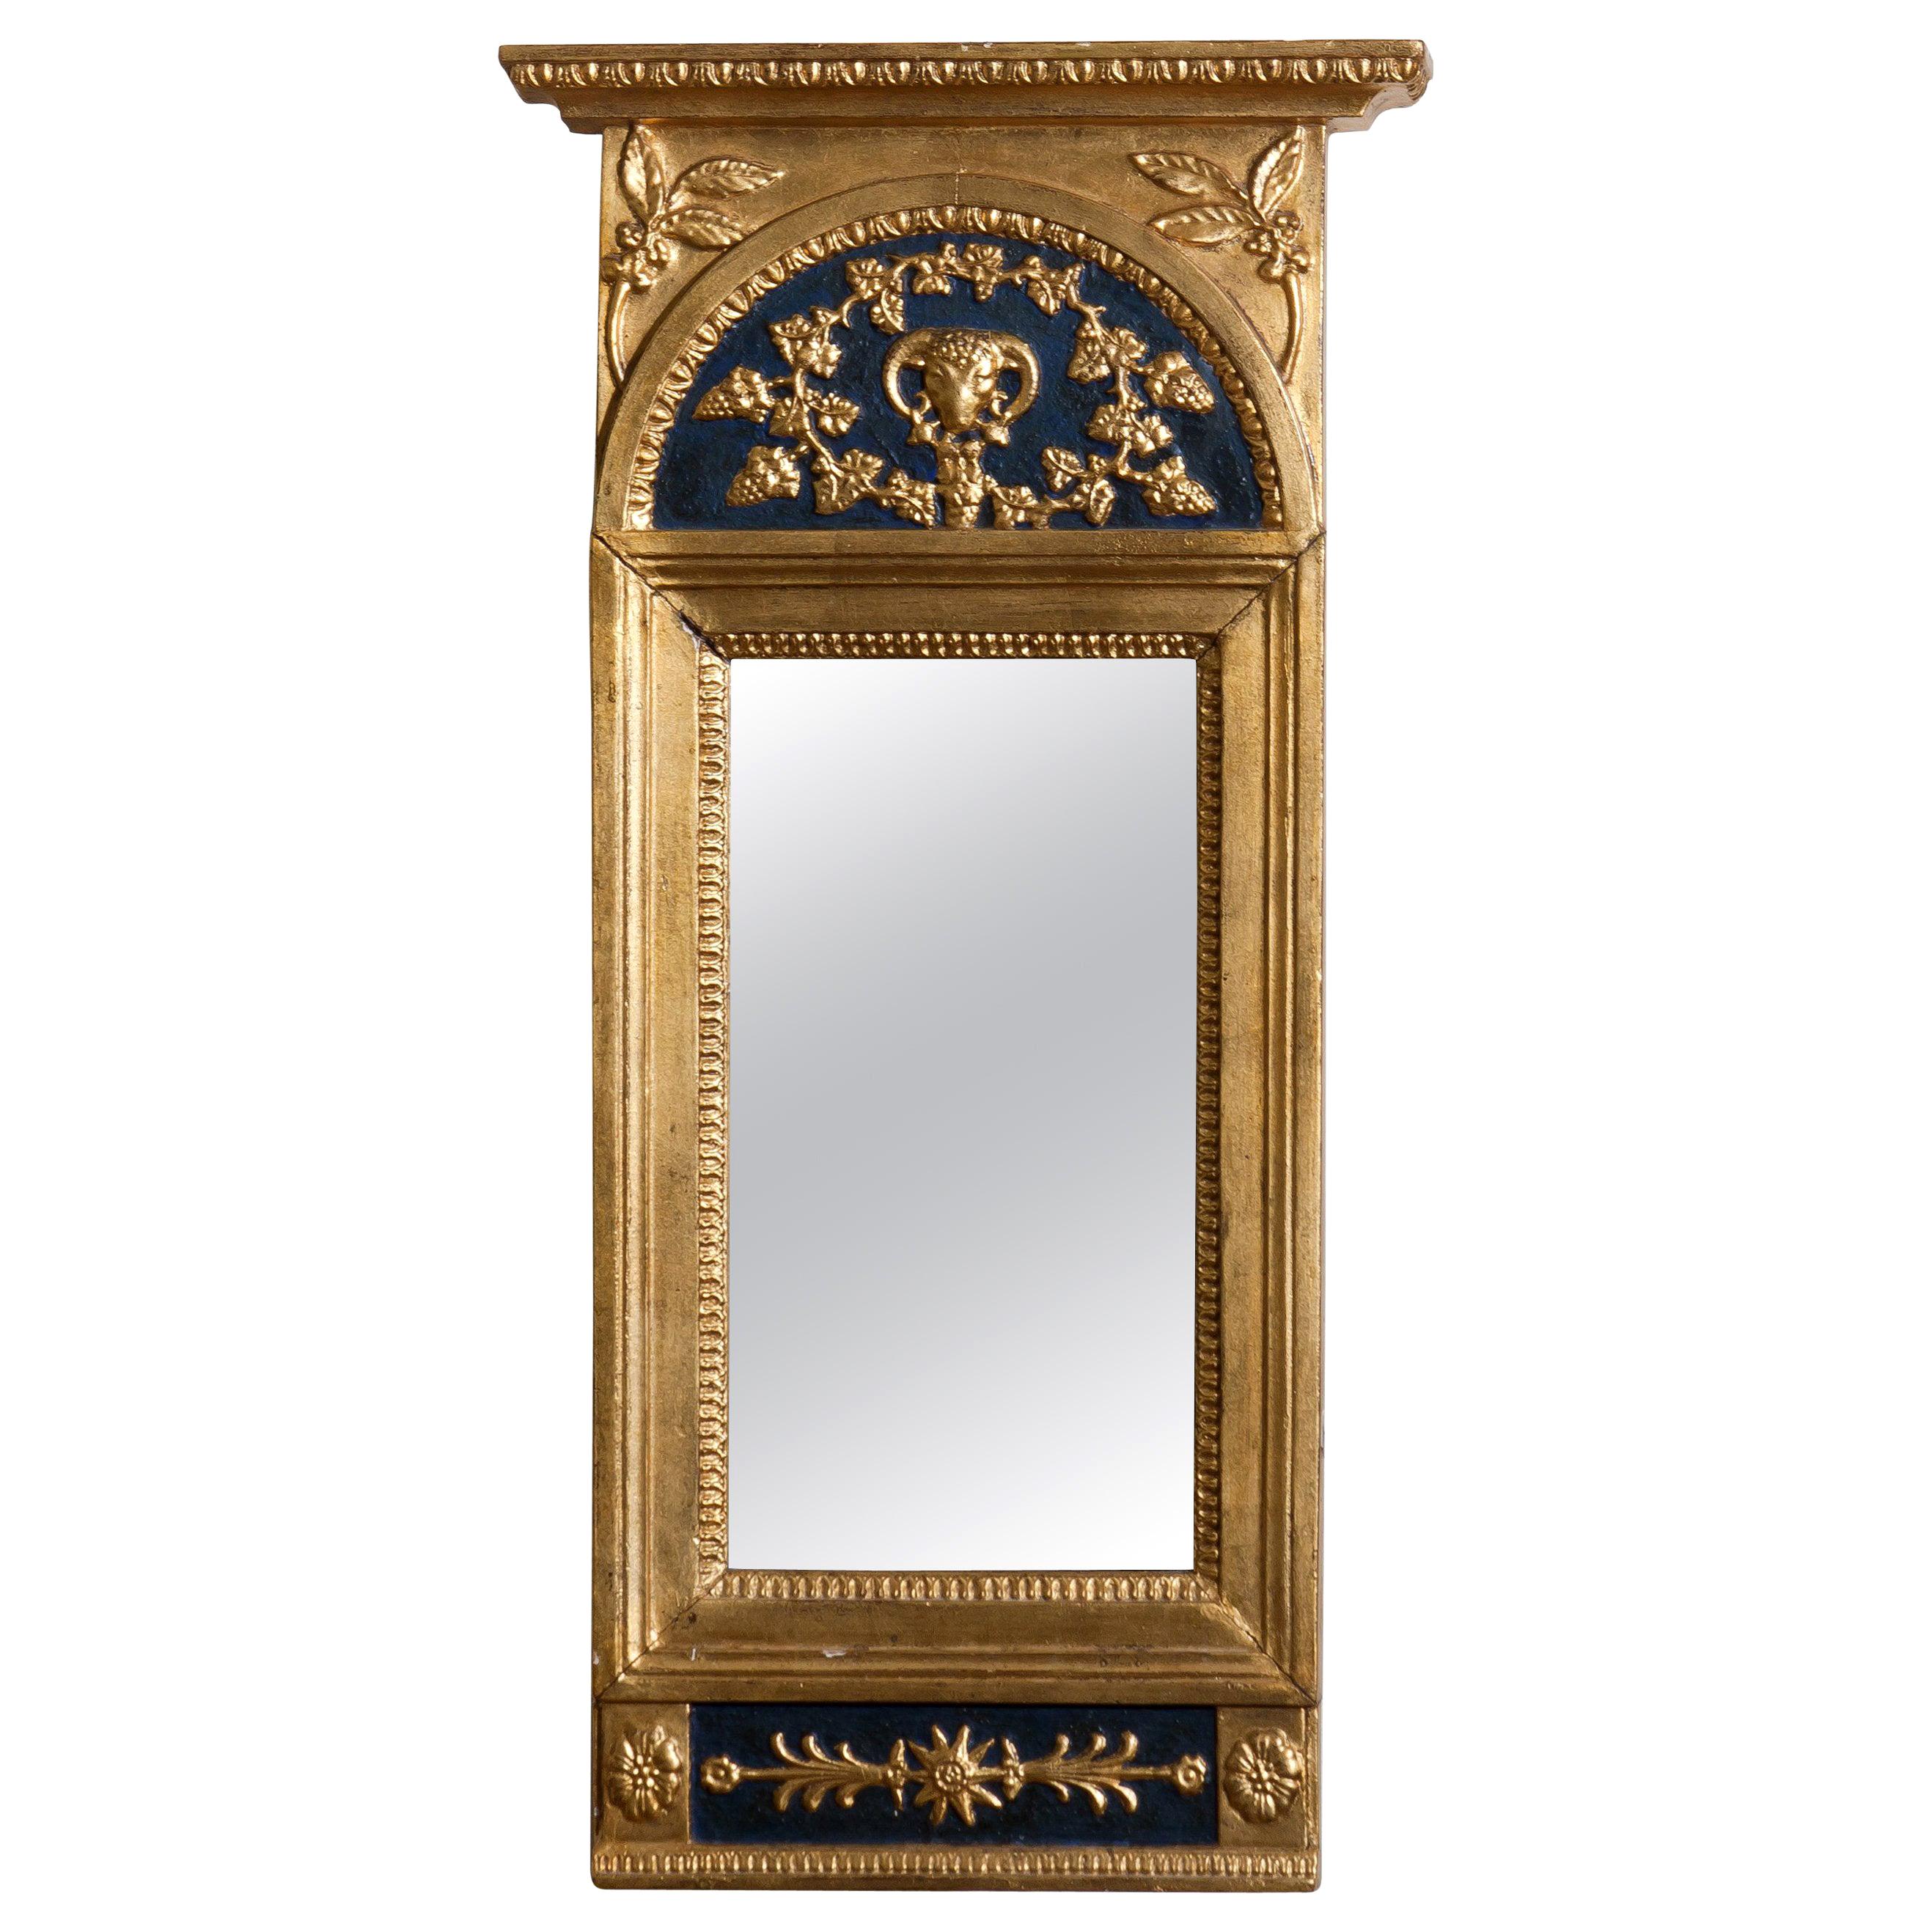 1800, Antique France Gilded / Panted Empire Mirror with Decoration